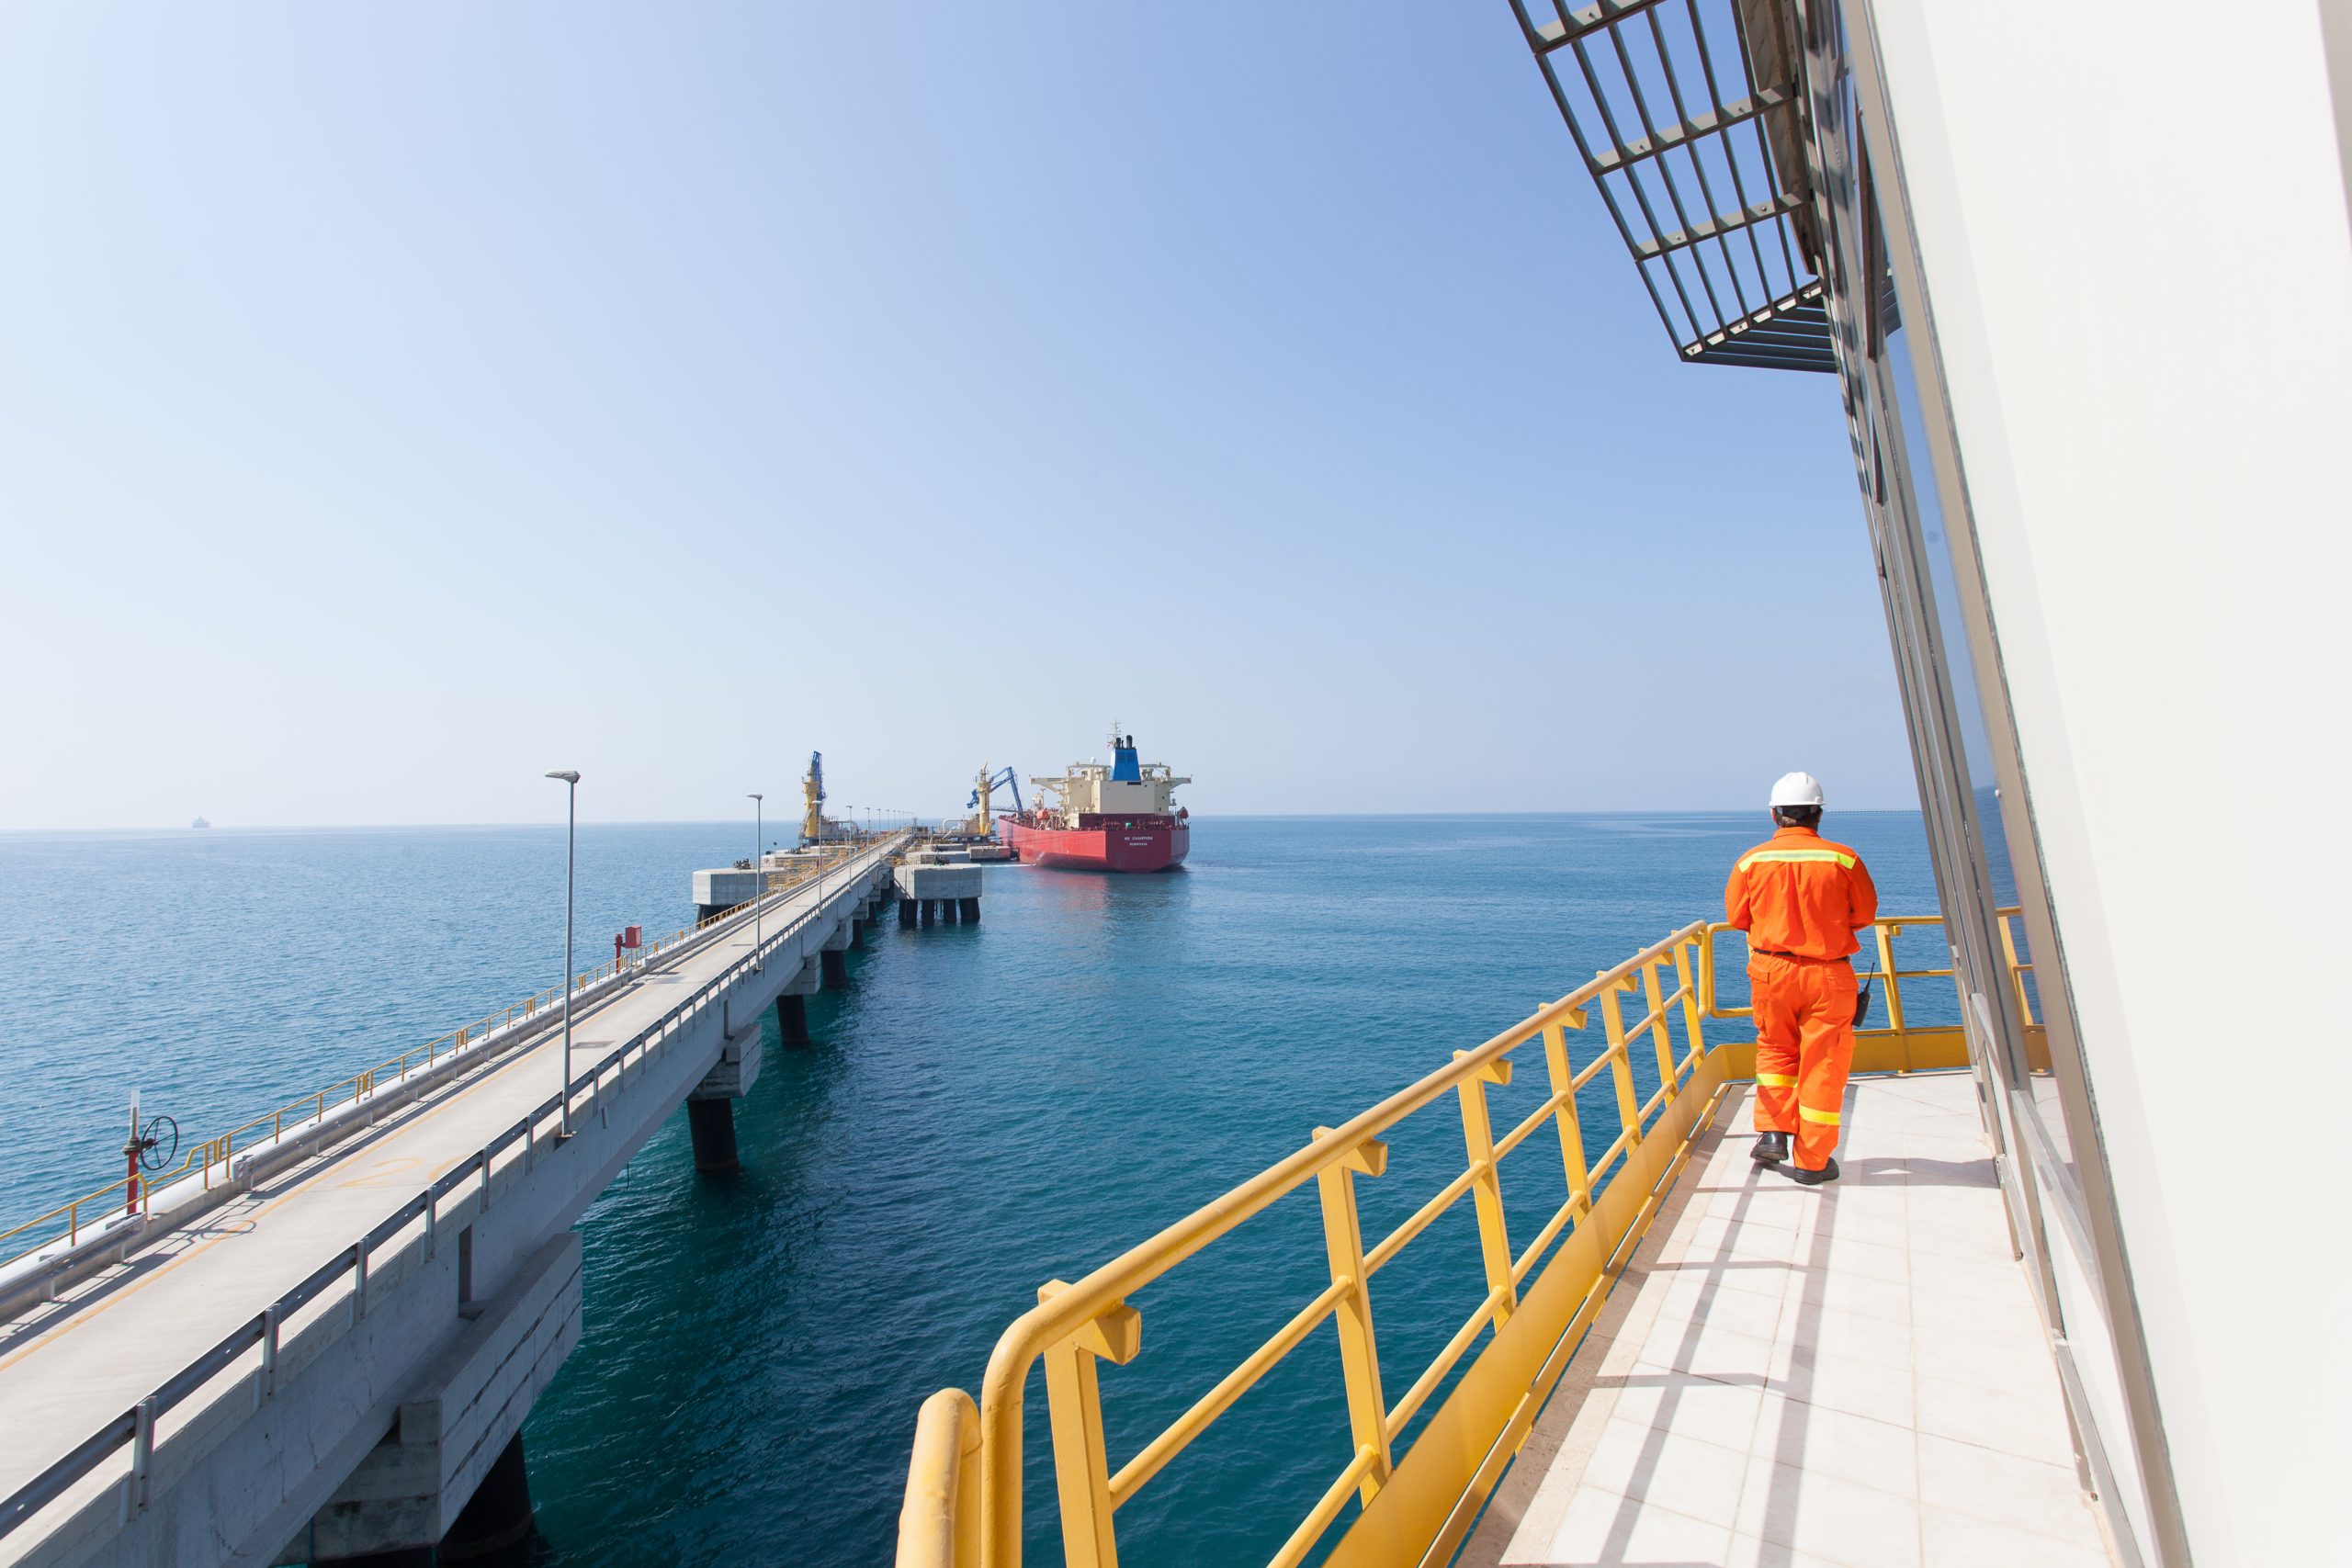 Photo: View of the jetty from the Jetty Control Room at the Ceyhan Terminal, Turkey. Credit: bp via Flickr. https://flic.kr/p/of8eAb